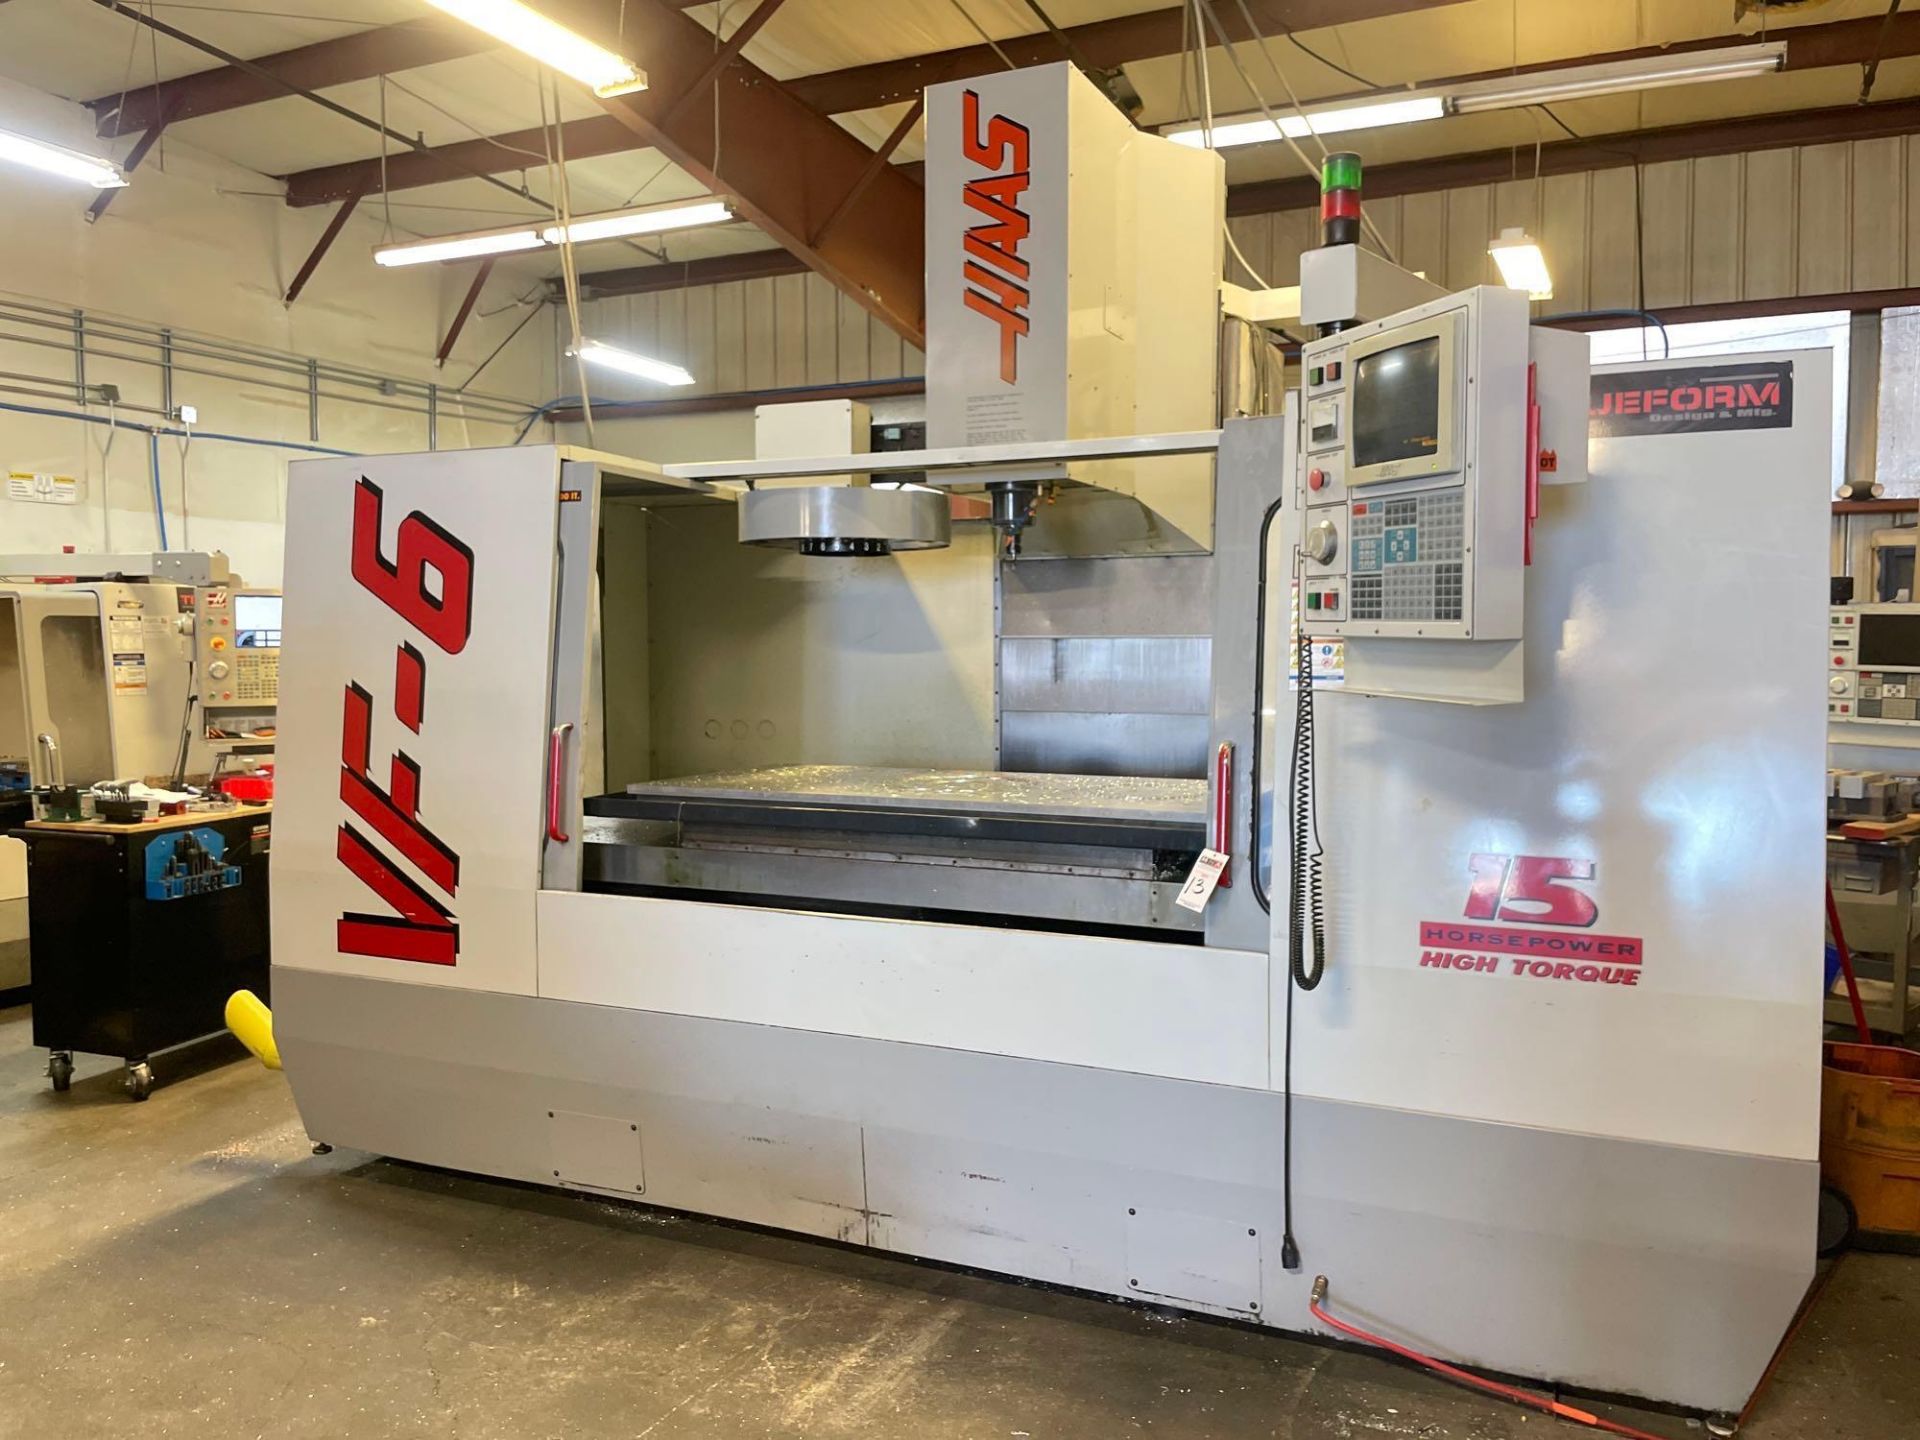 Haas VF-6 4-Axis Ready Vertical Machining Center, 64” x 32” x 30” Trvls., CT40, 20 ATC, New 1997 - Image 5 of 10